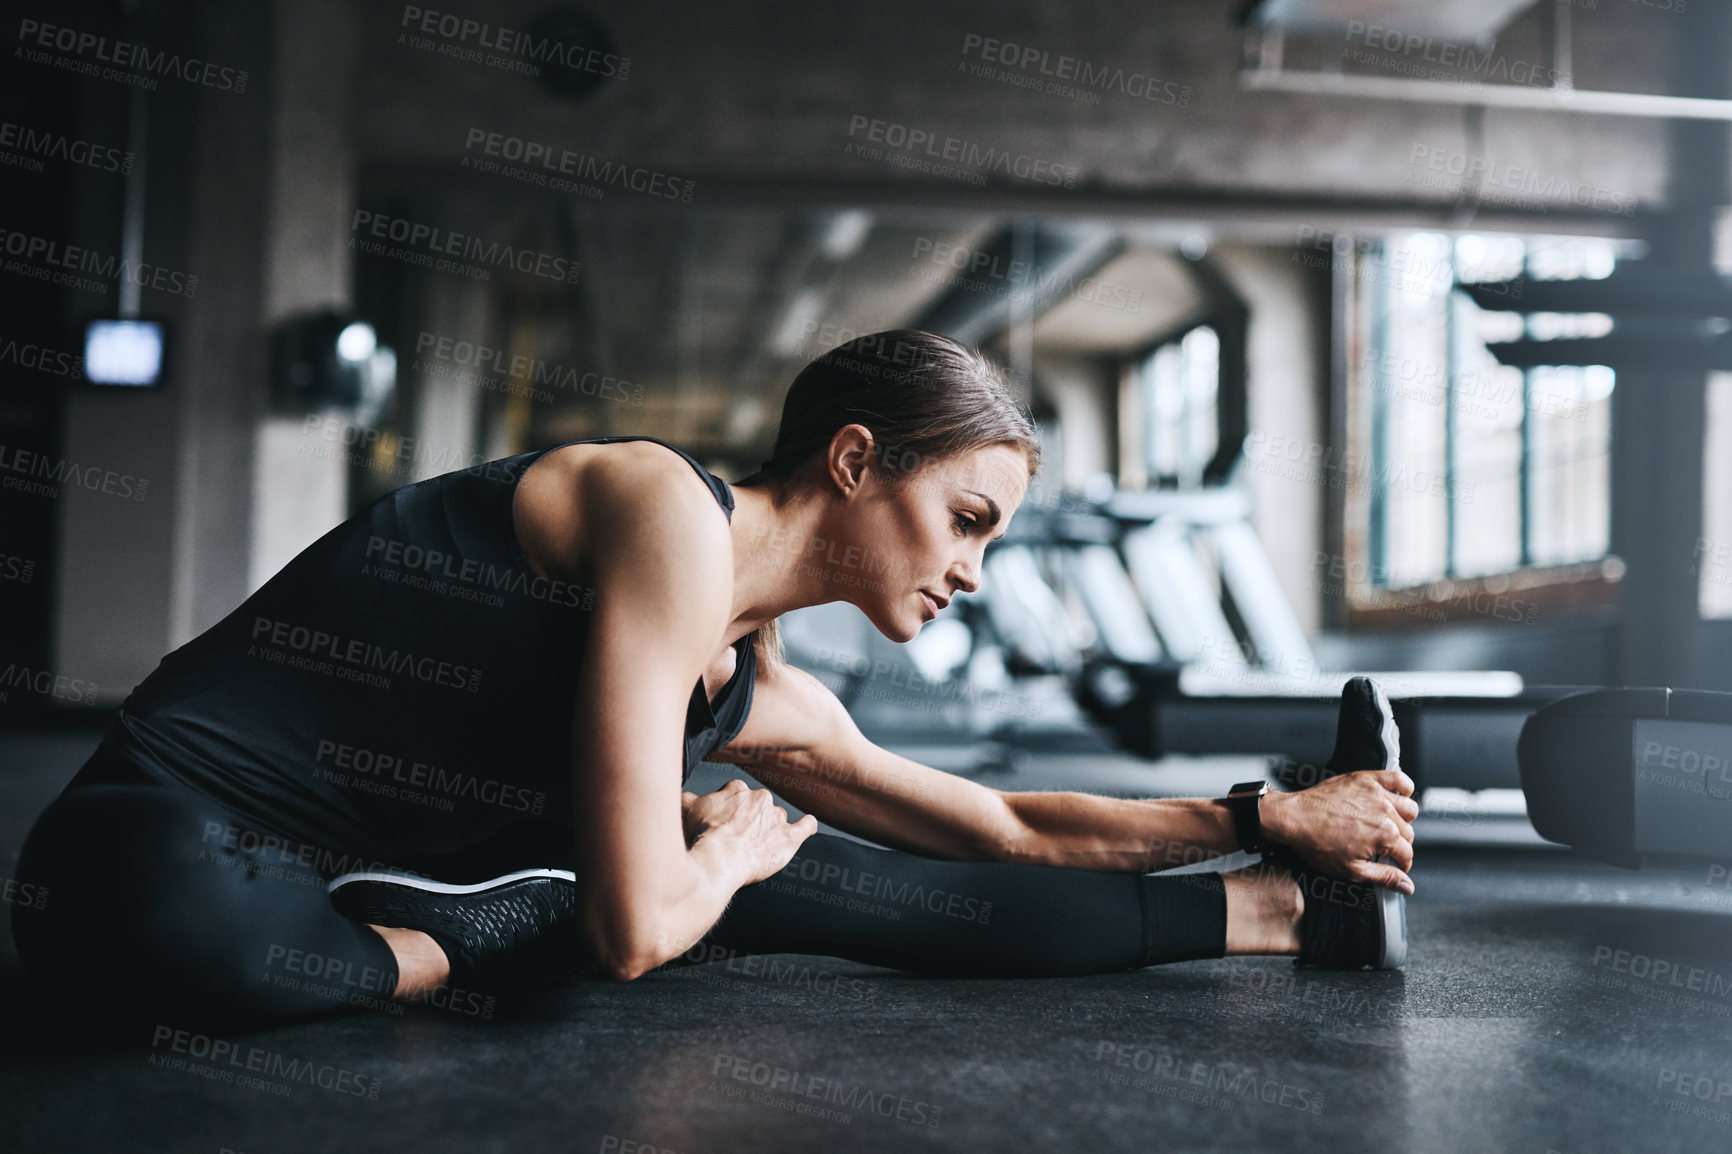 Buy stock photo Shot of an attractive young woman stretching during her workout in a gym